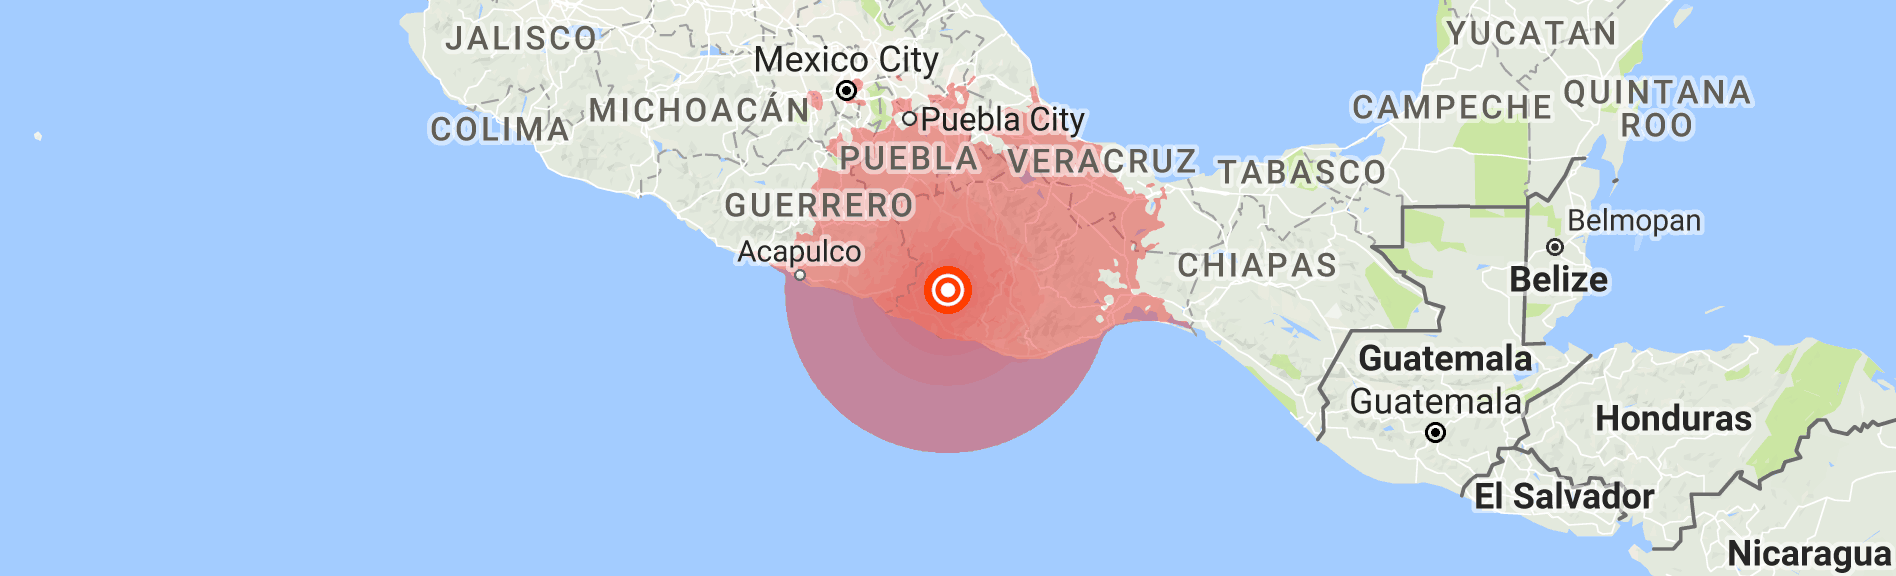 Earthquake shaking south and central Mexico, preliminary magnitude of 7.2